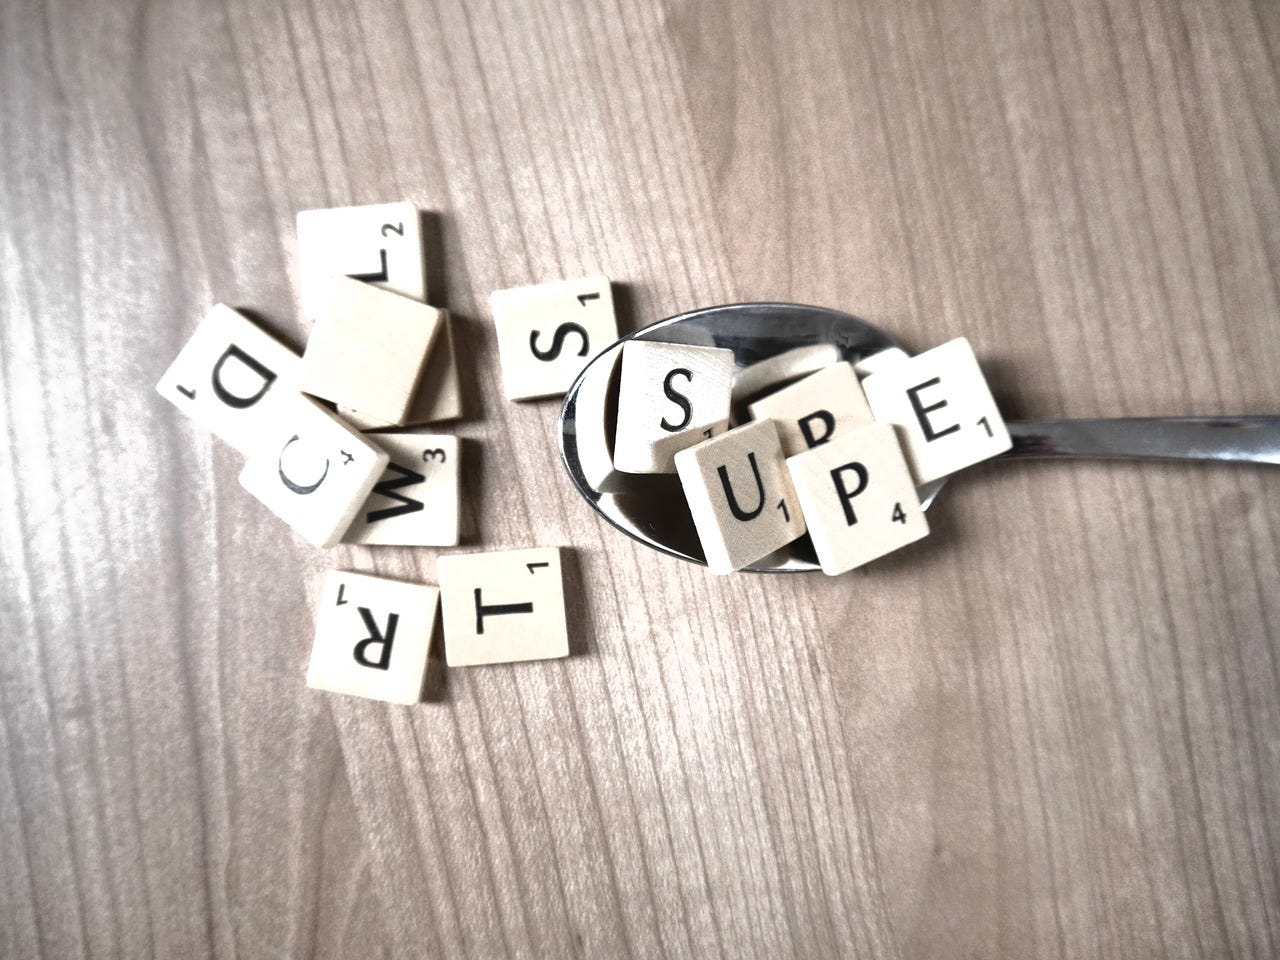 scrabble tiles on spoon and countertop